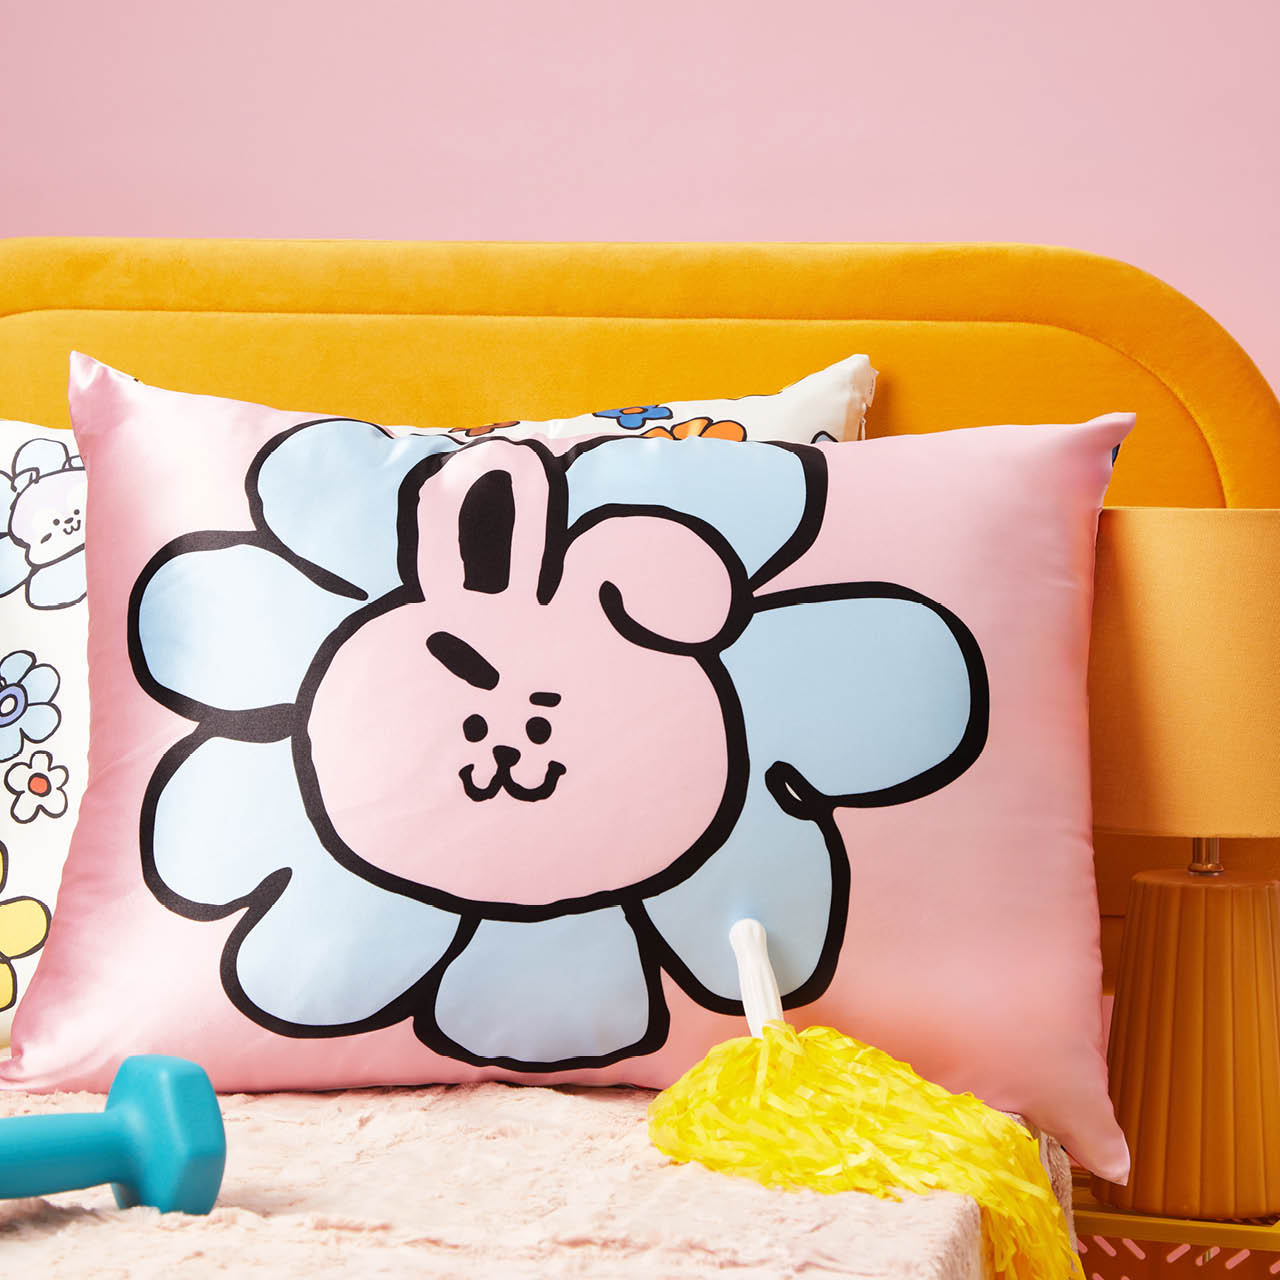 GIFTER'S BT21 Shooky Plush Pillow,BT-21 Animal Stuffed Pillow Soft ToY  -25cm (WASHABLE) - 35 cm - BT21 Shooky Plush Pillow,BT-21 Animal Stuffed  Pillow Soft ToY -25cm (WASHABLE) . Buy BT-21 toys in